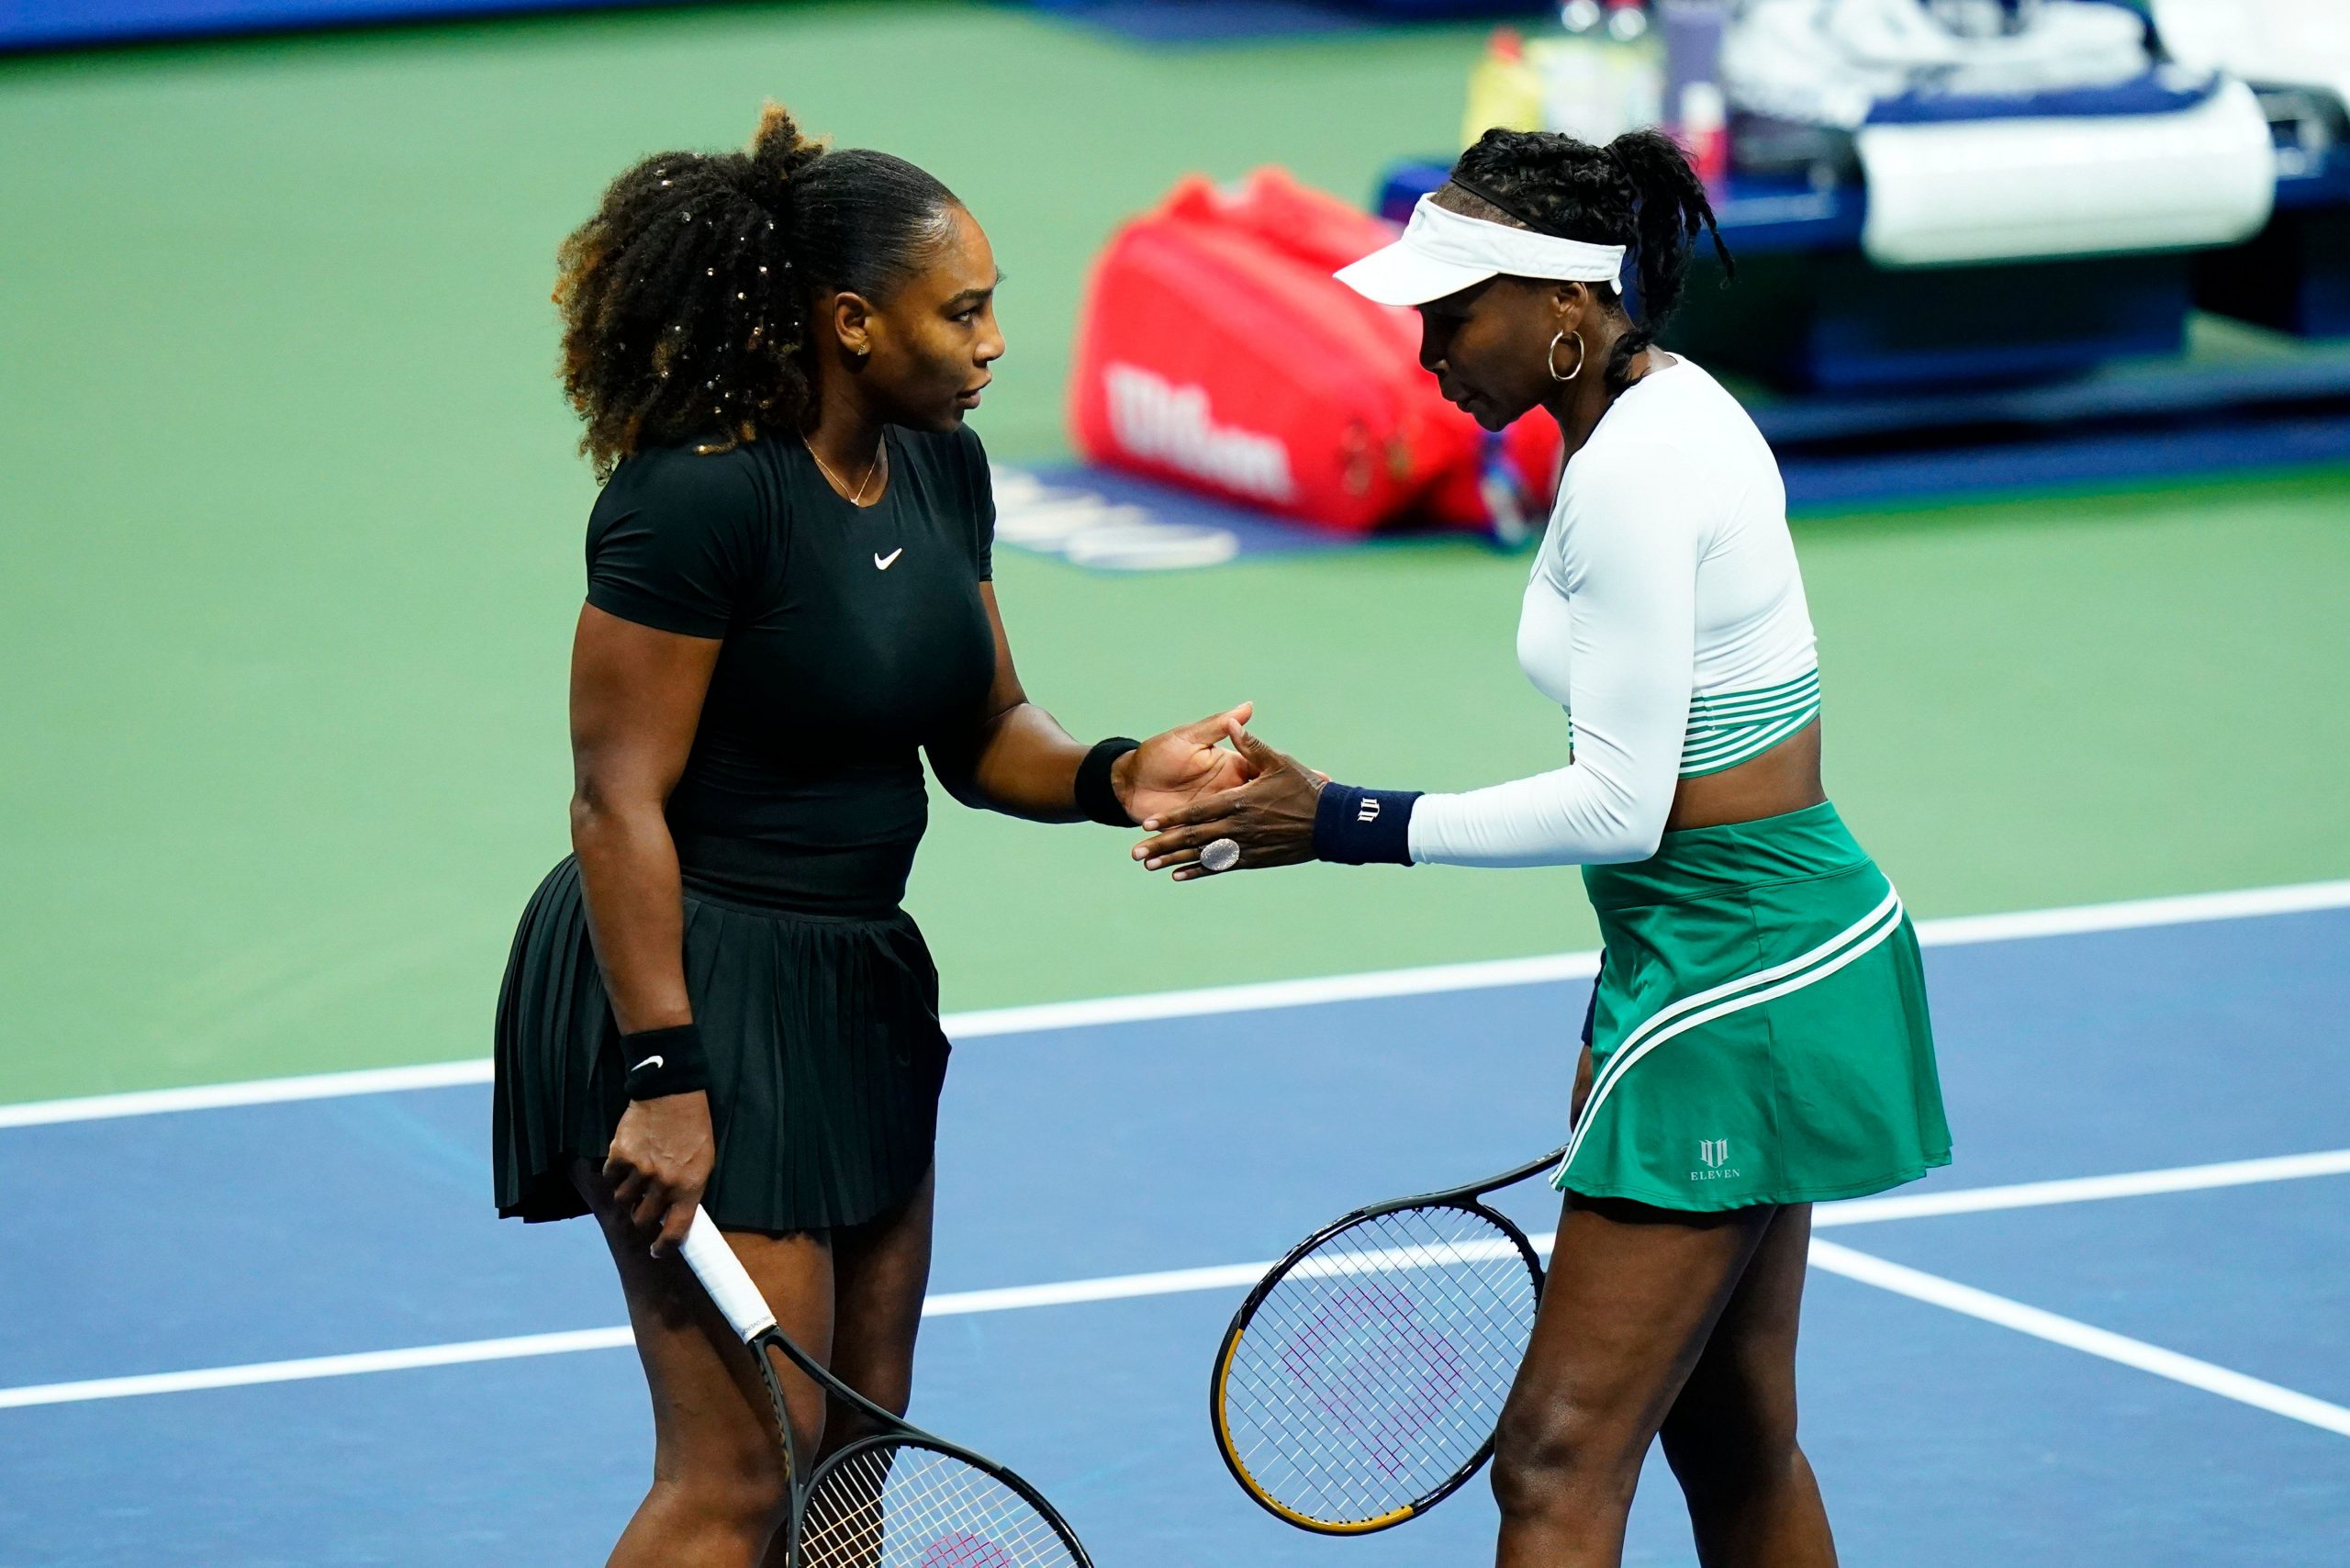 Serena and Venus Williams: Historical significance of the legendary doubles pair